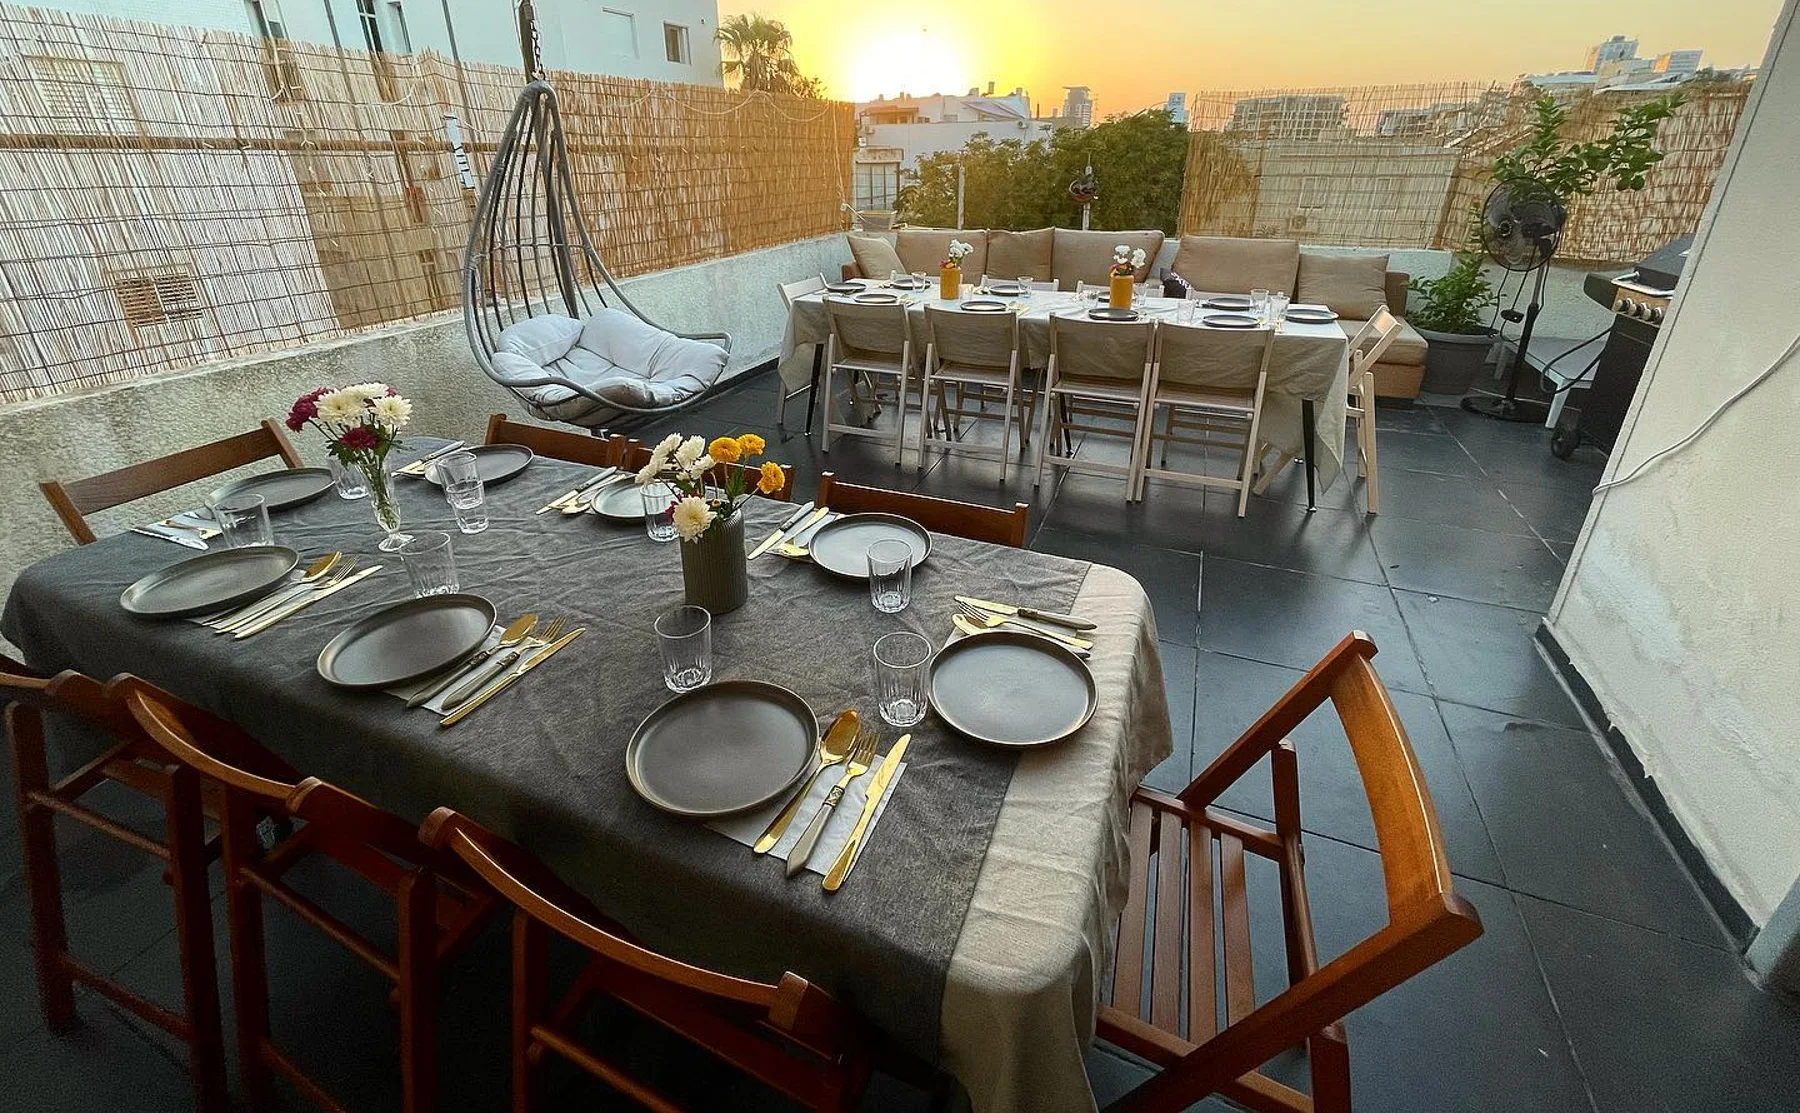 Private Event-Dinner & Dine on a Tel Aviv Rooftop - 1467264